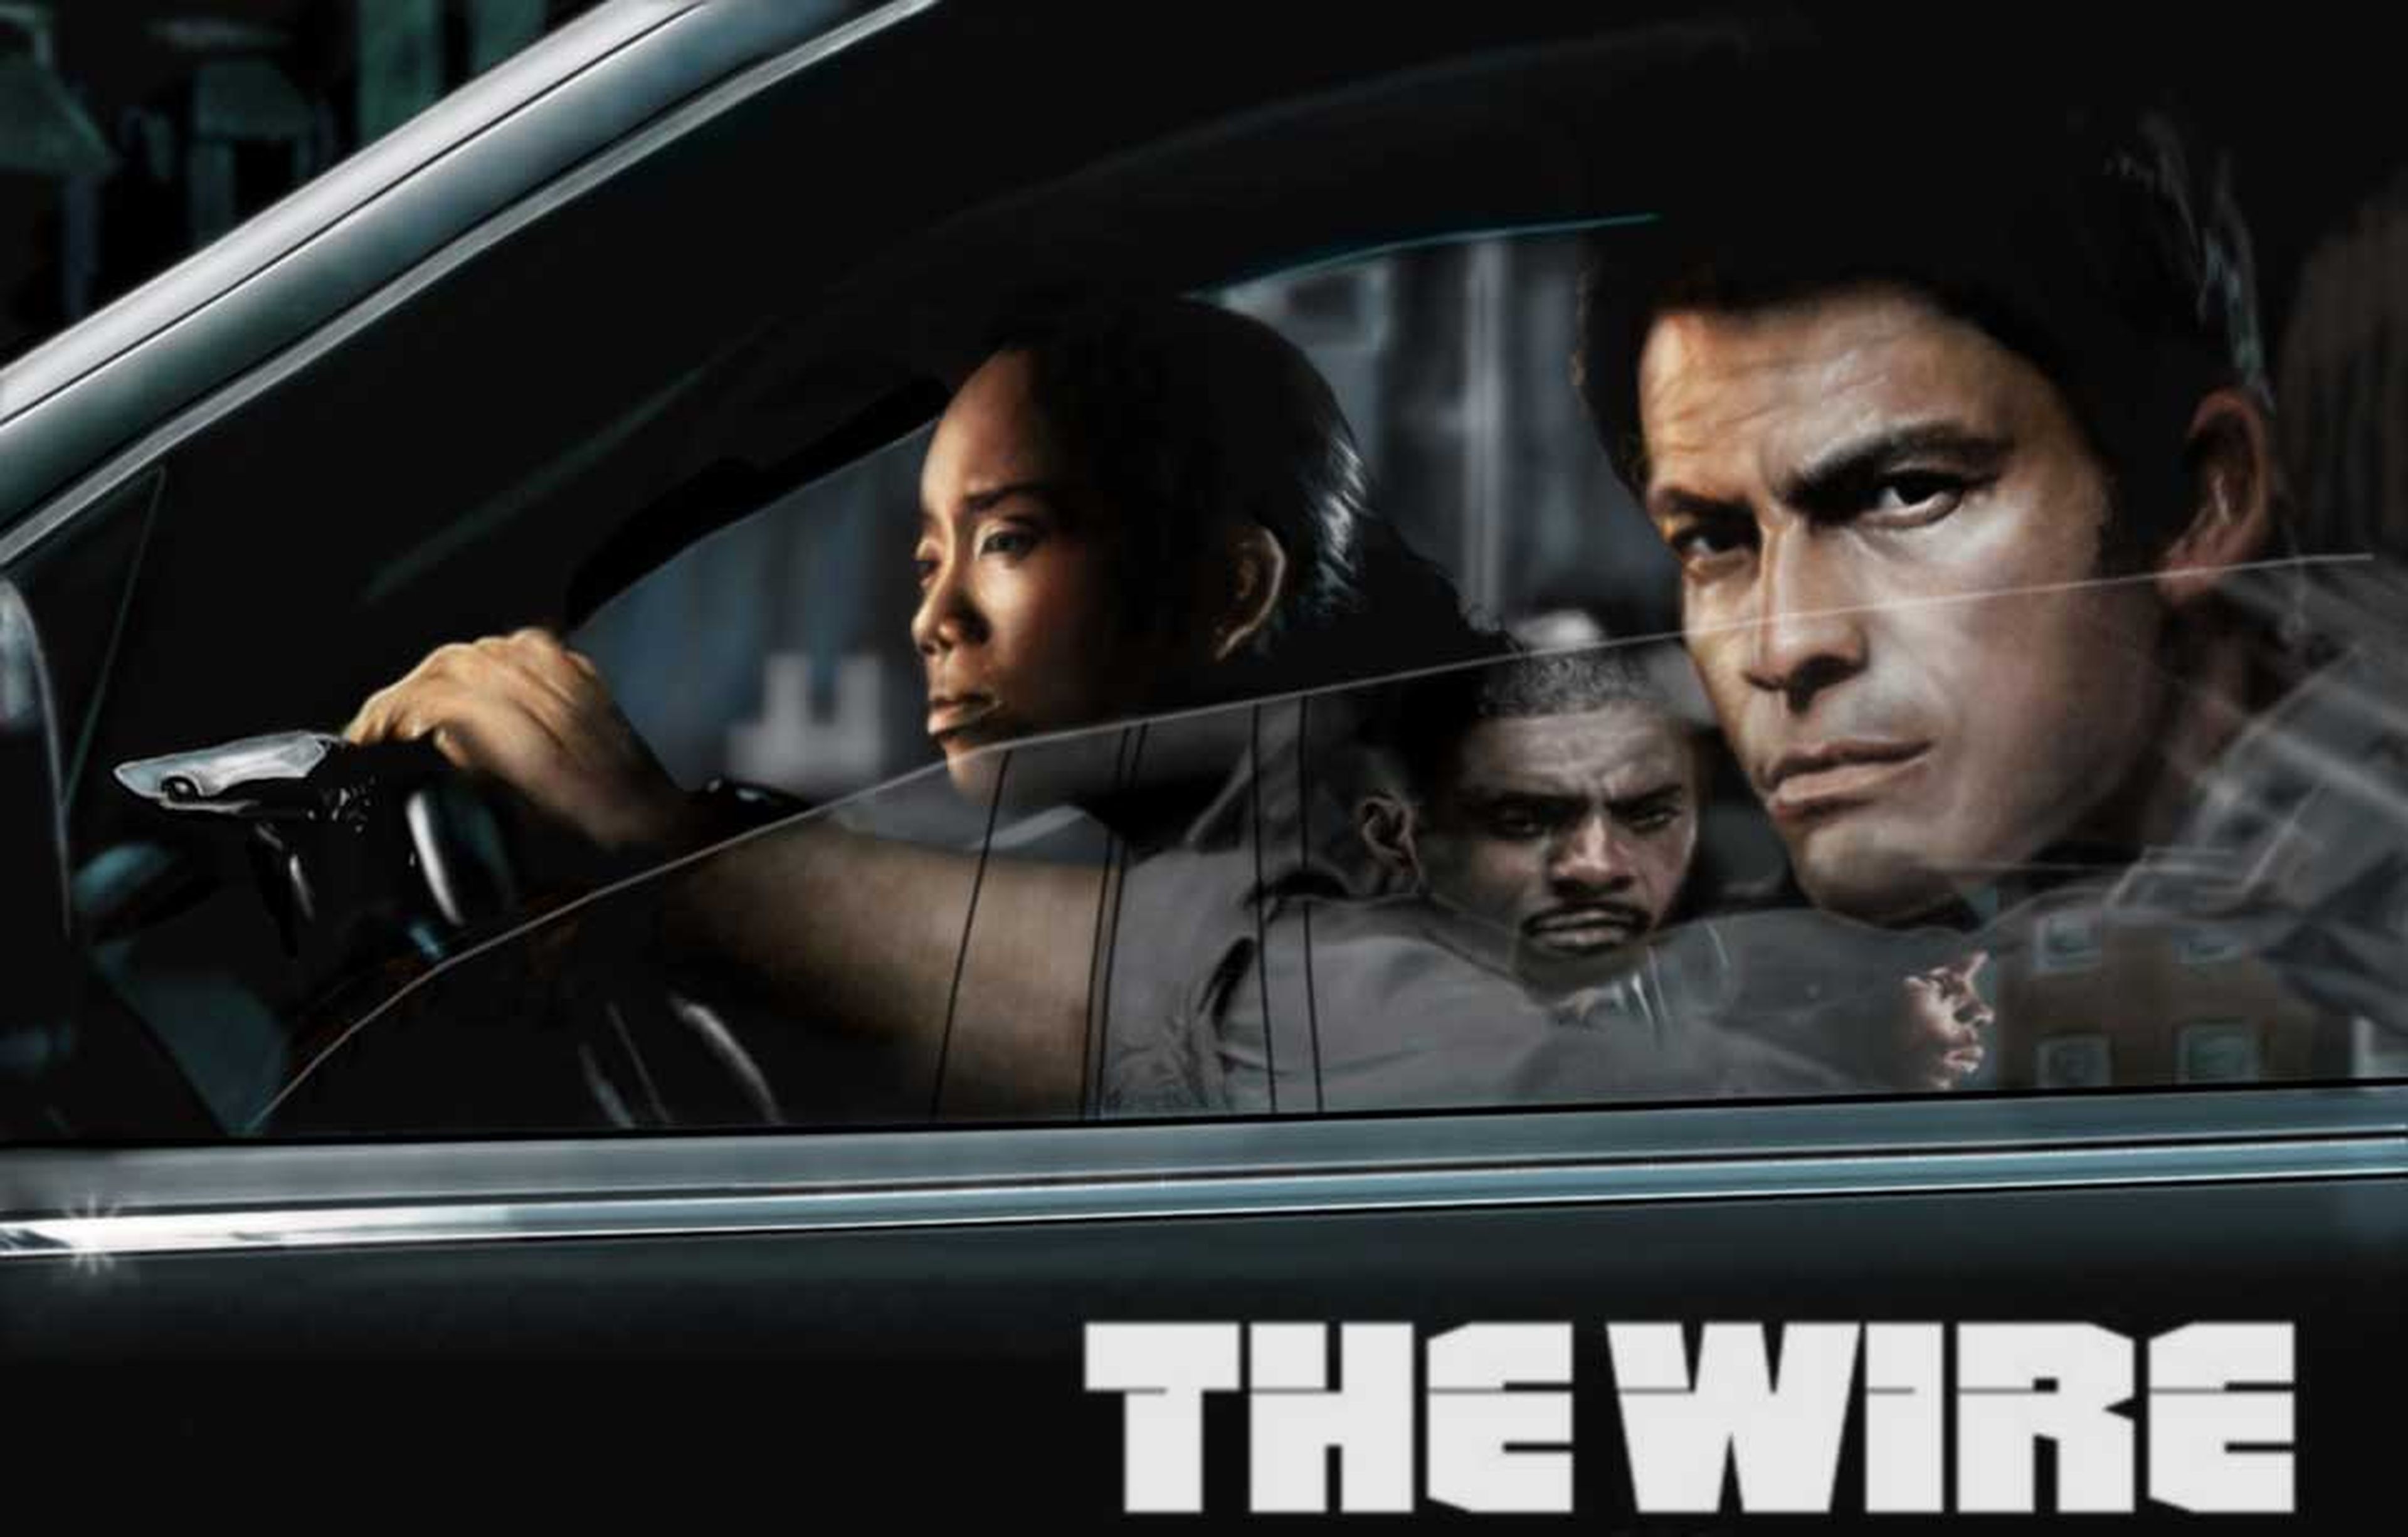 8. The Wire (2002 - 2008)